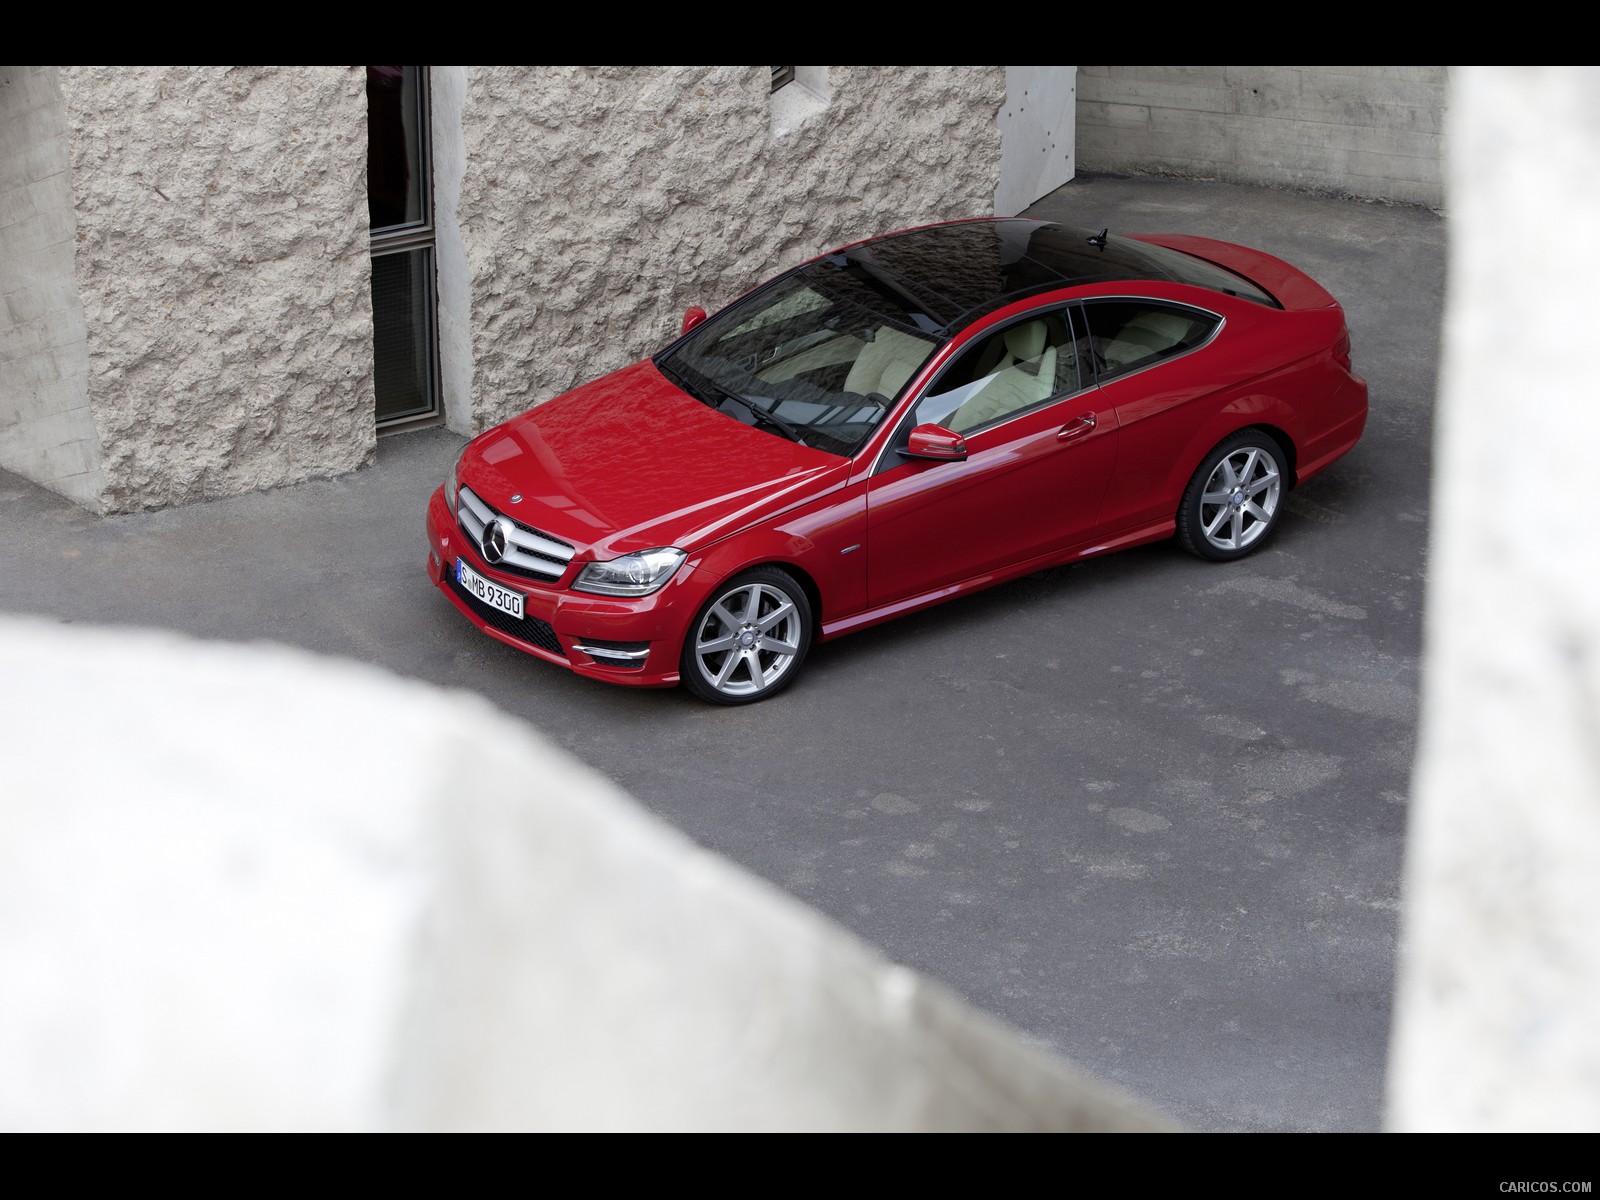 Mercedes-Benz C-Class Coupe (2012)  - Top, #33 of 79